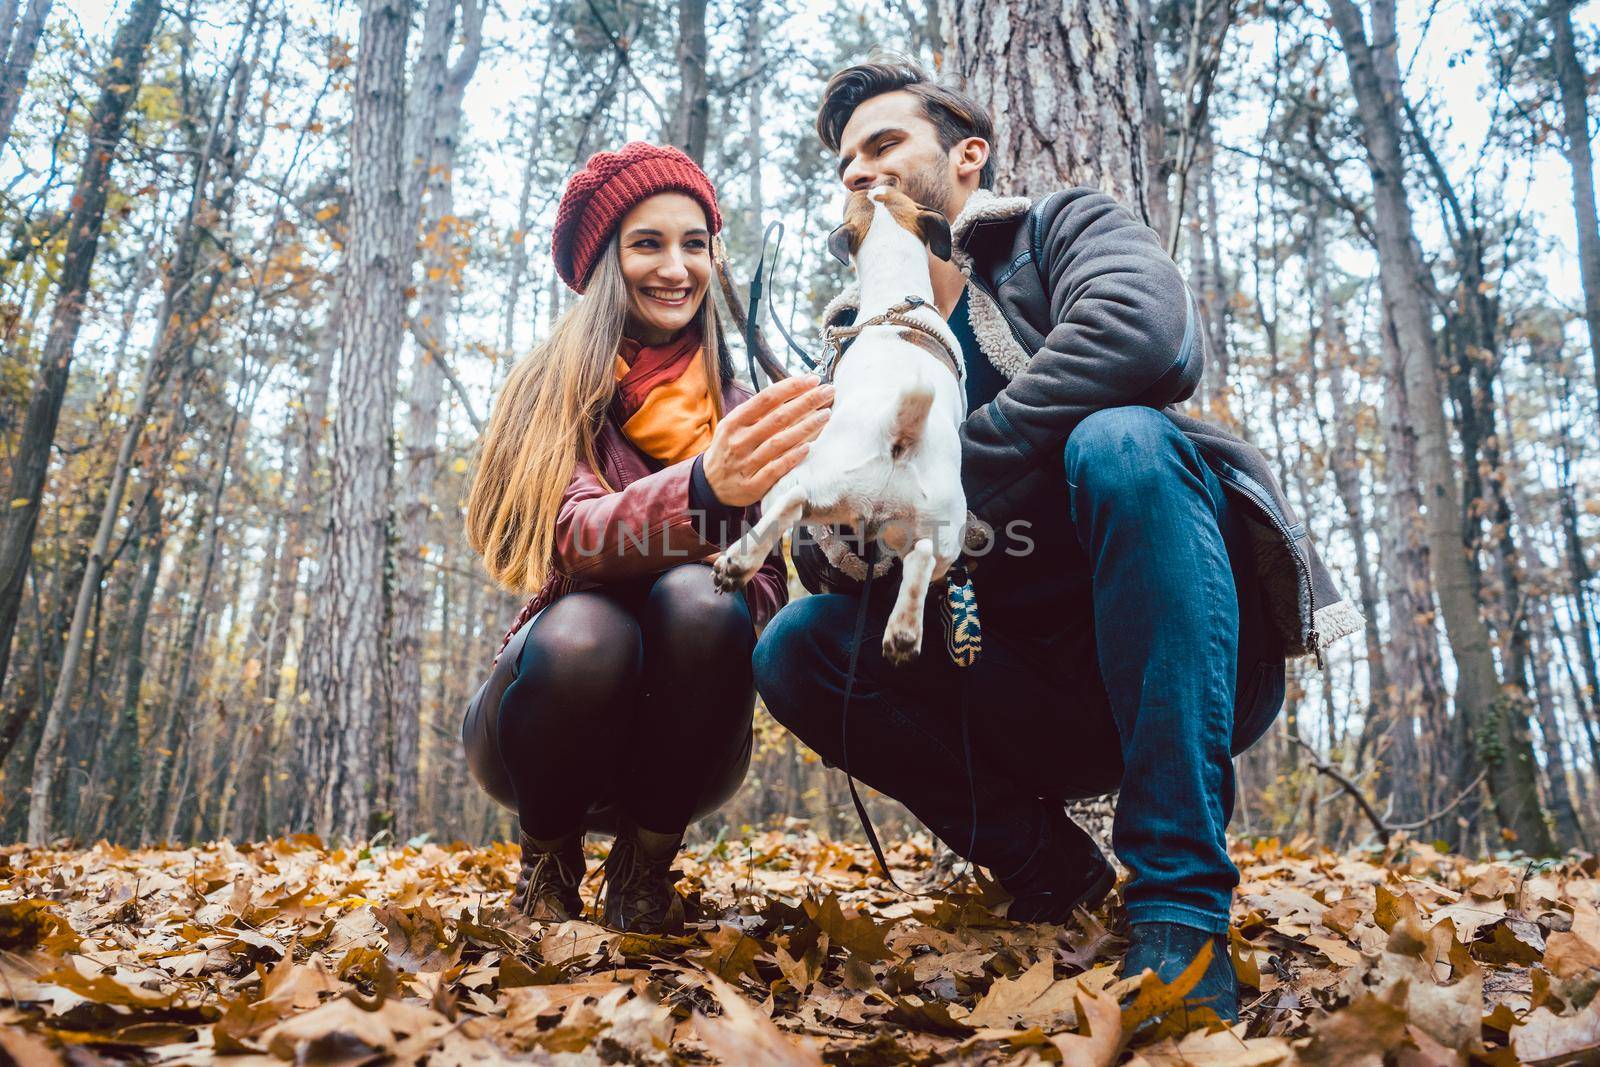 Couple of woman and man playing with their dog in colorful fall landscape